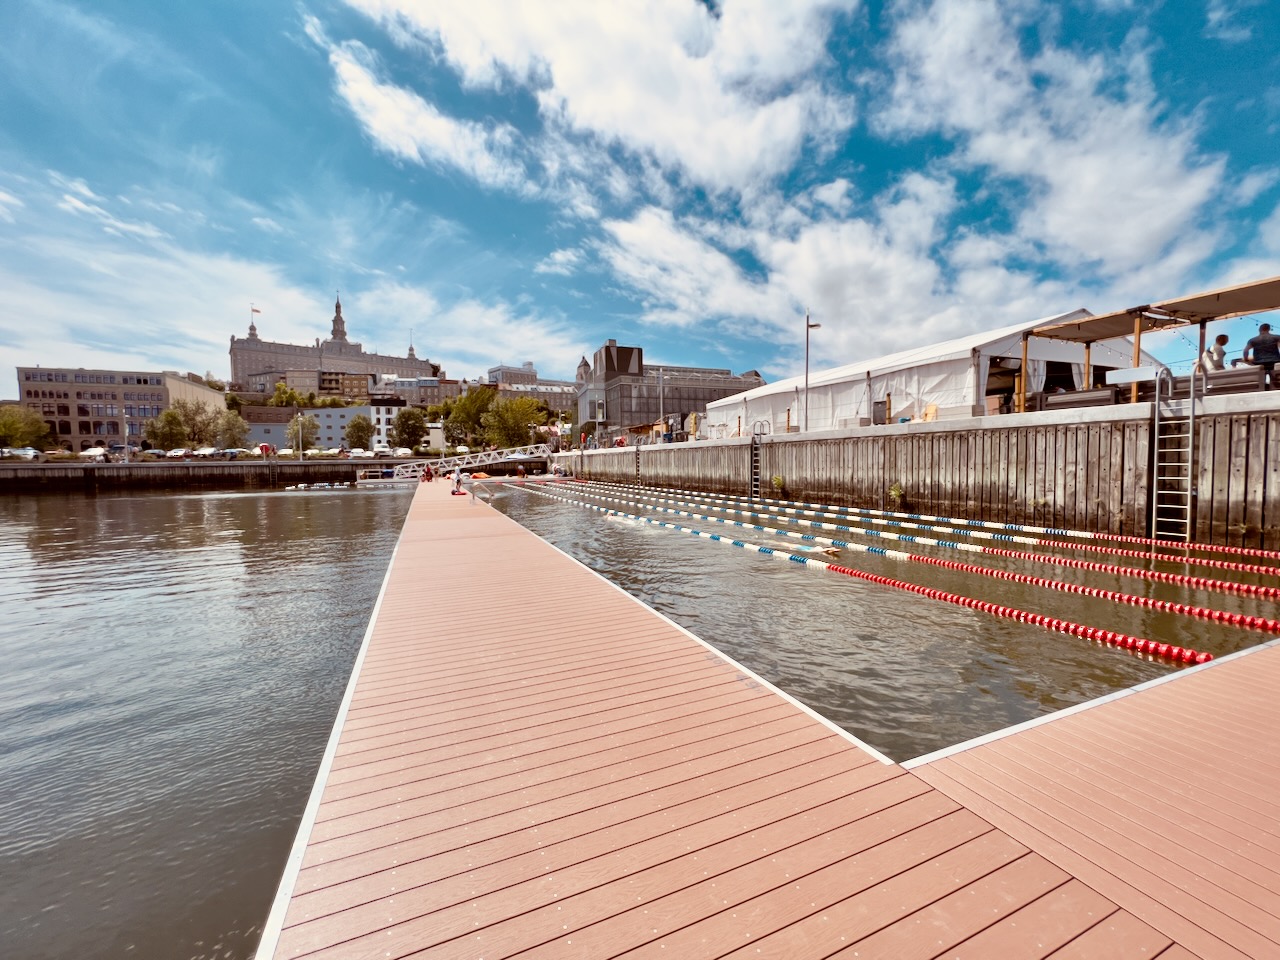 Oasis Port de Quebec - urban swimming - Best Things to do in Quebec city 